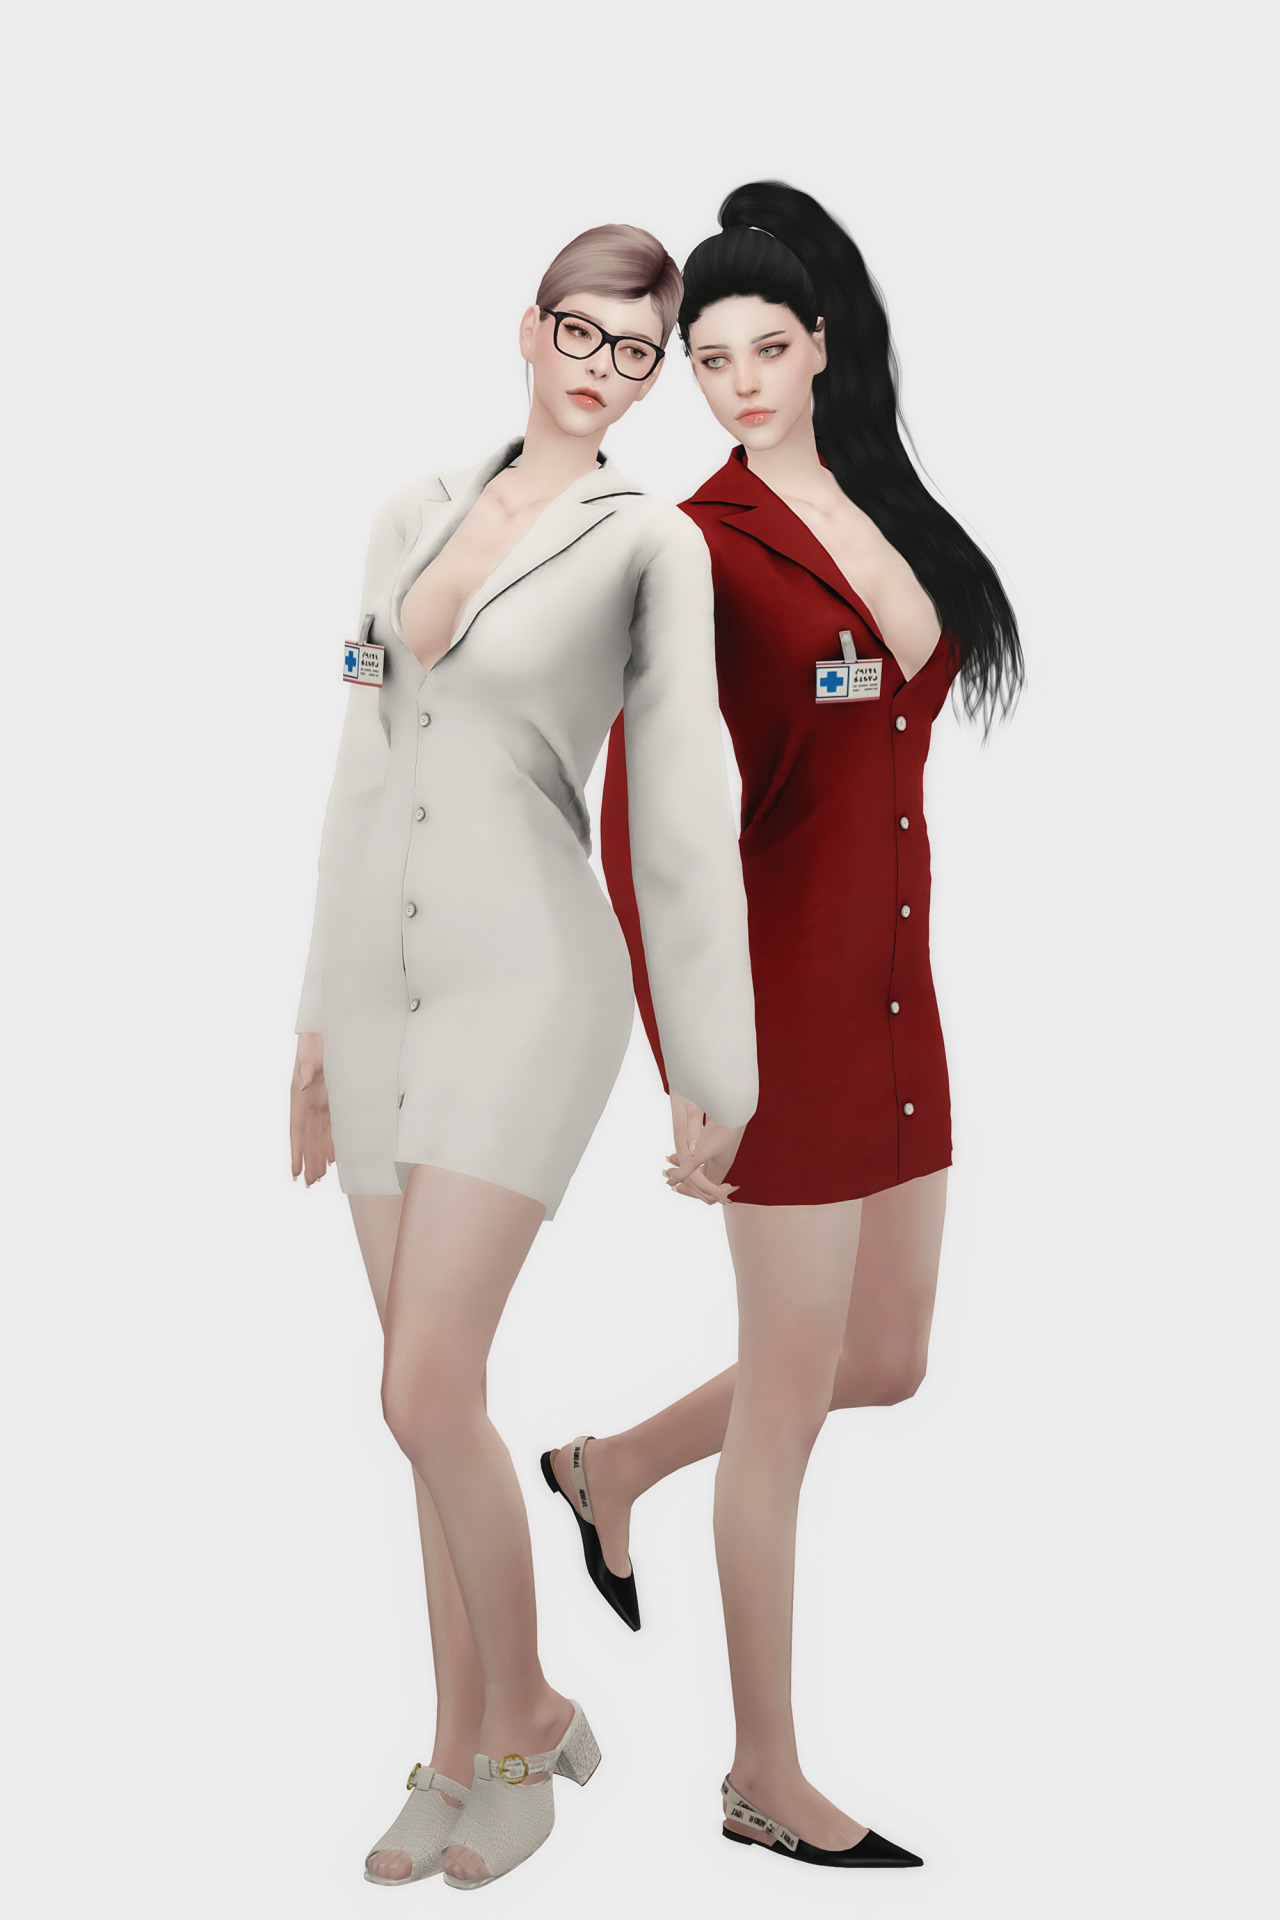 Sims 4 Sexy Doctor Gown The Sims Book 